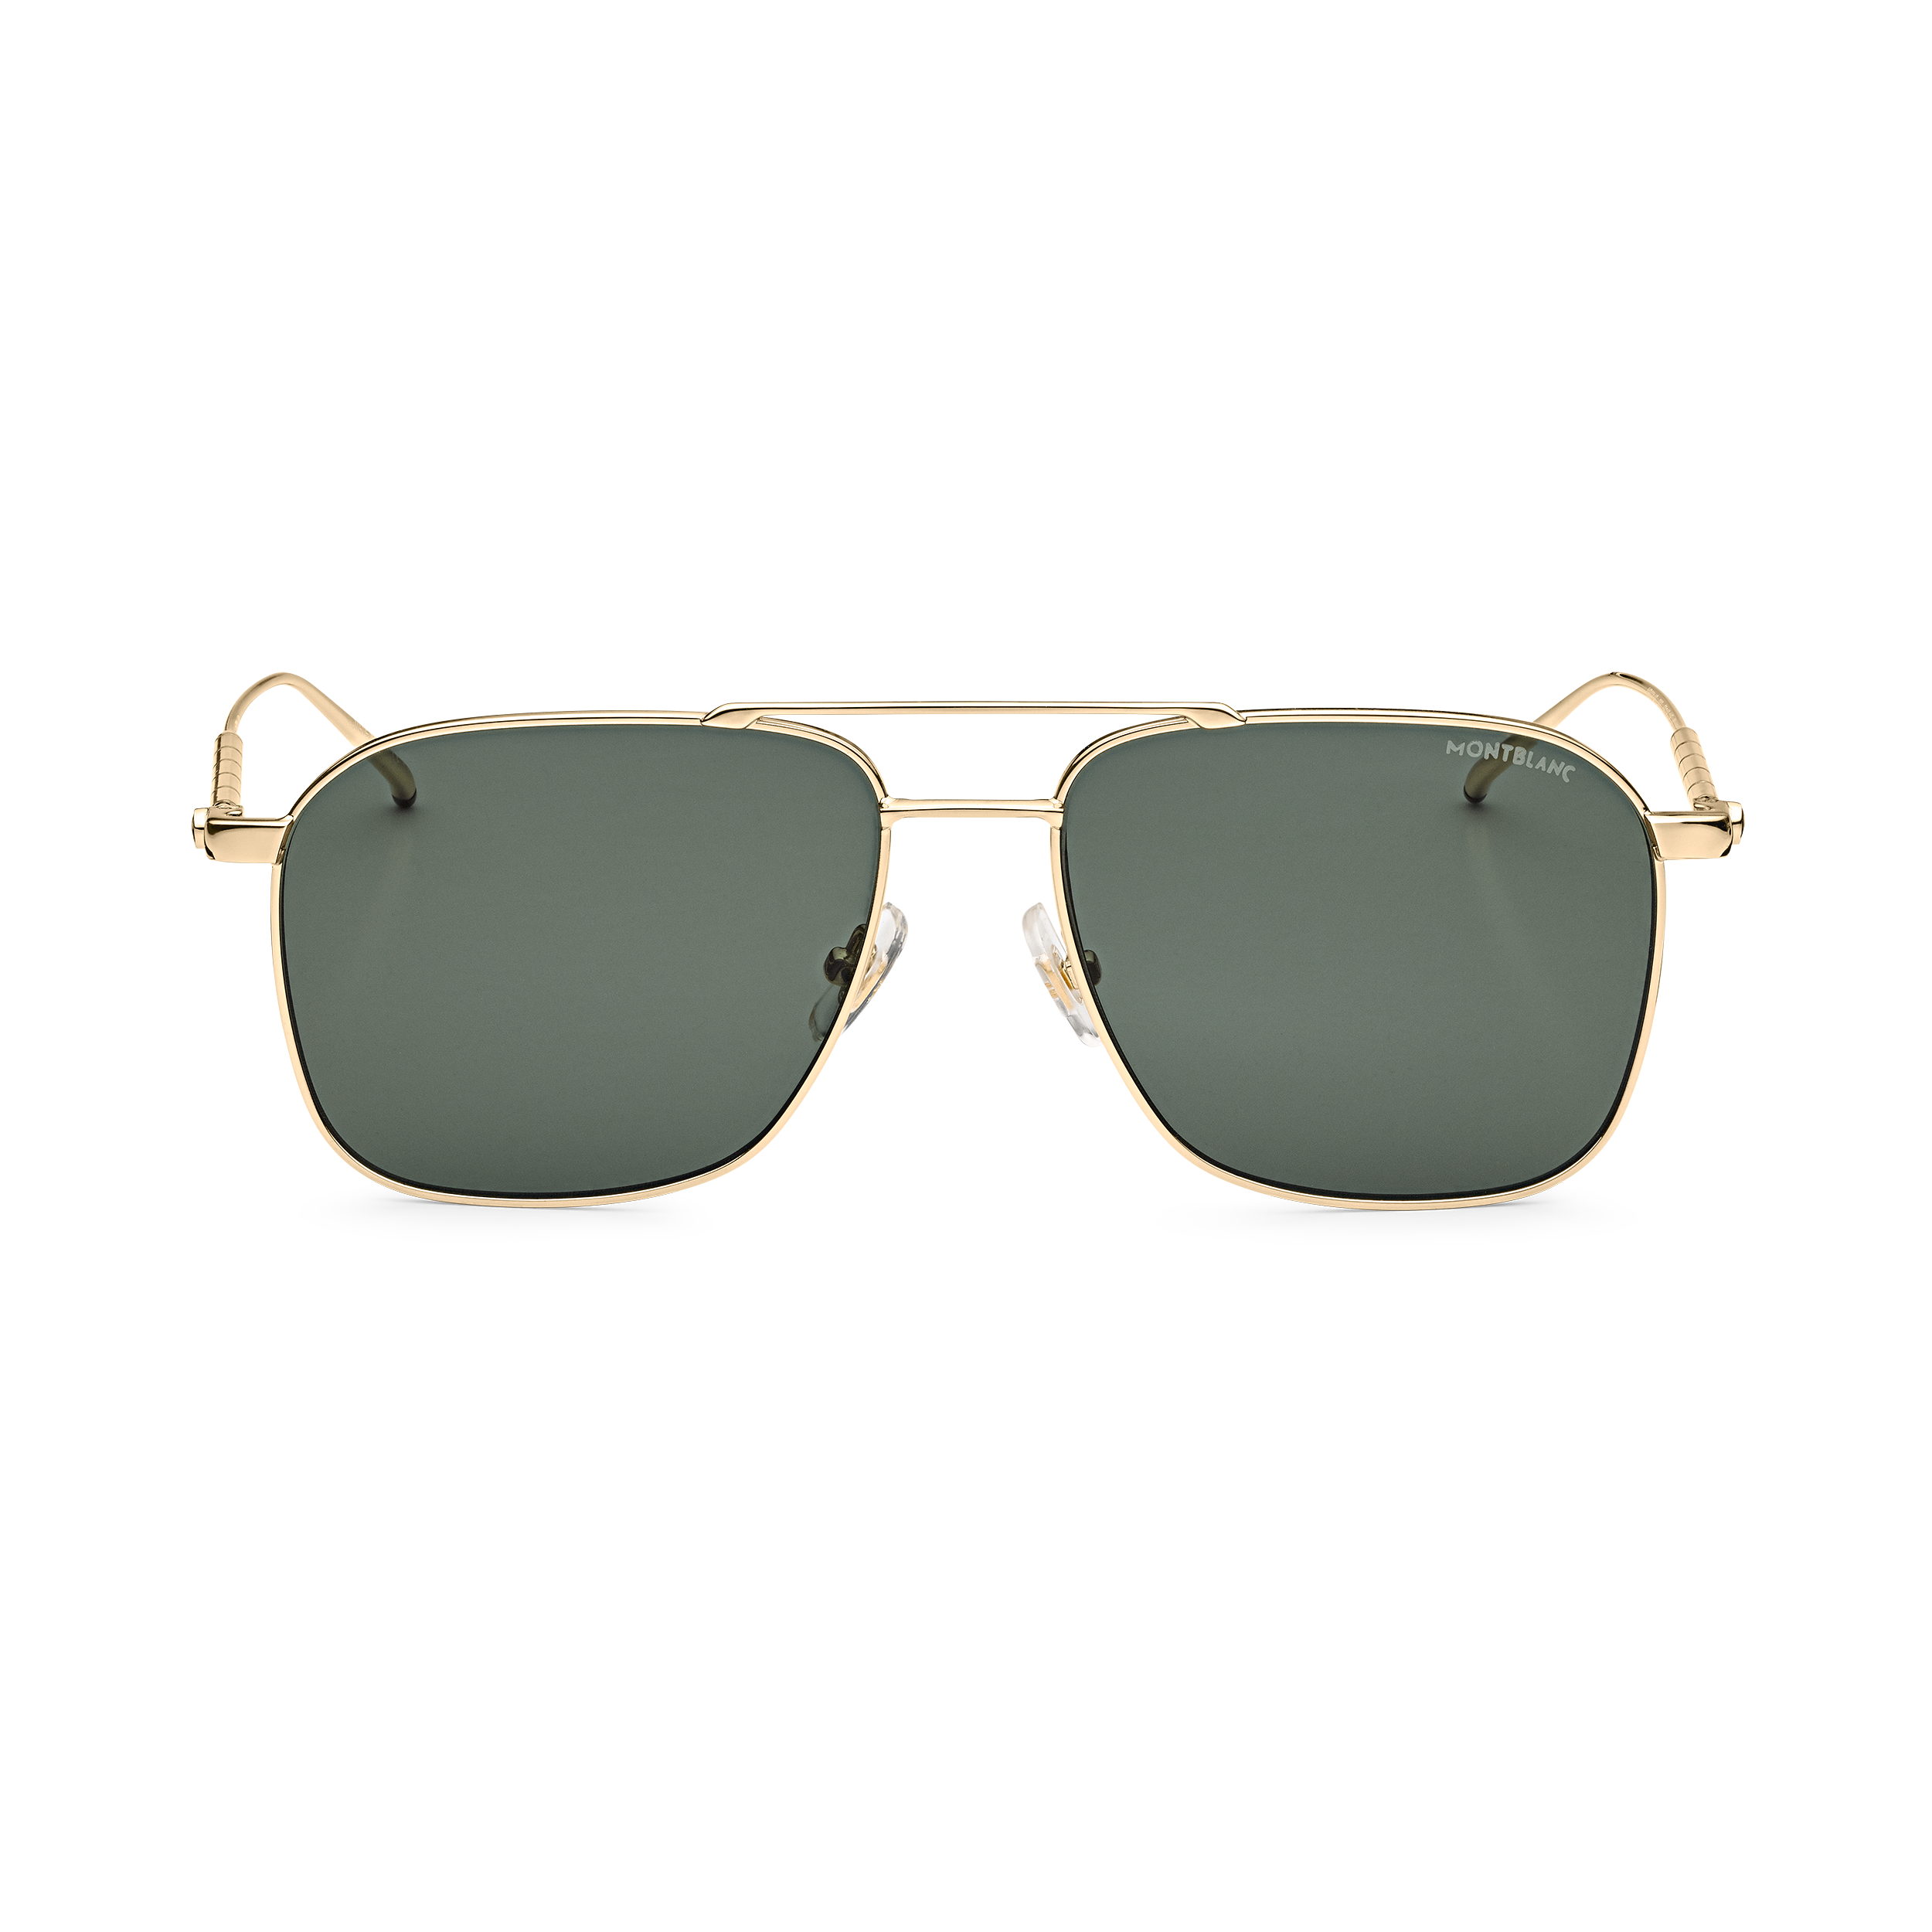 Rectangular Sunglasses with Gold-Colored Metal Frame, image 1